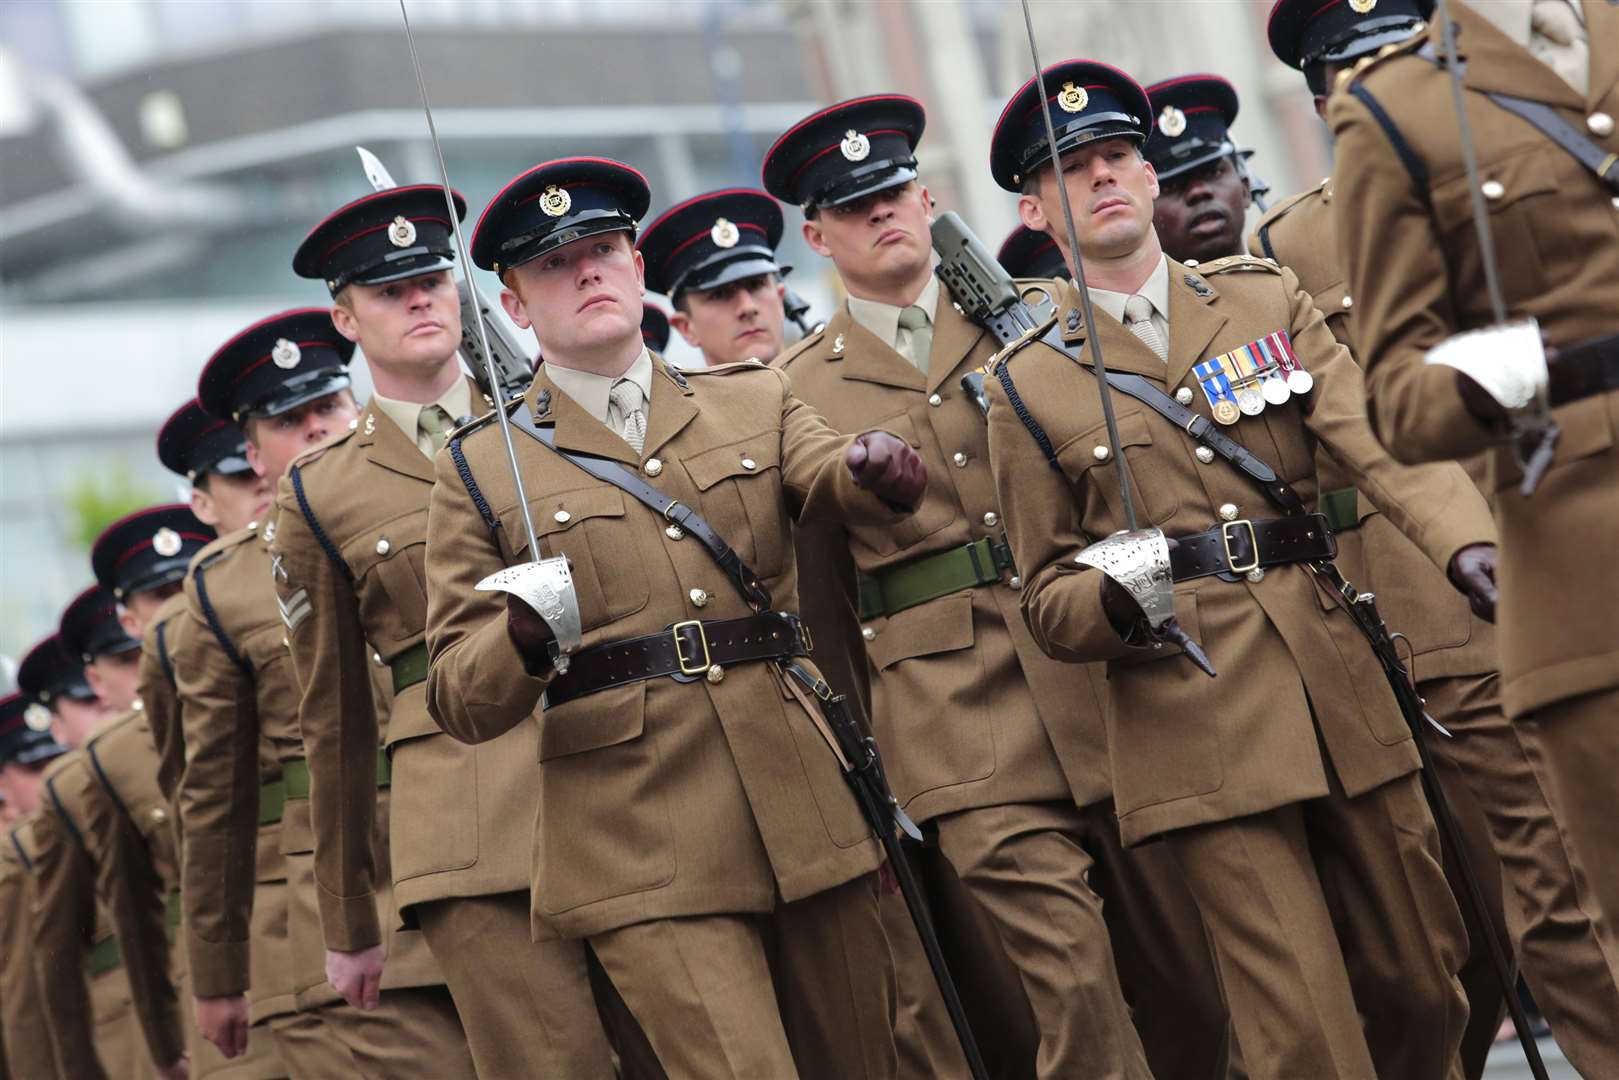 Members of 36 Engineer Regiment in the parade. Picture: Martin Apps